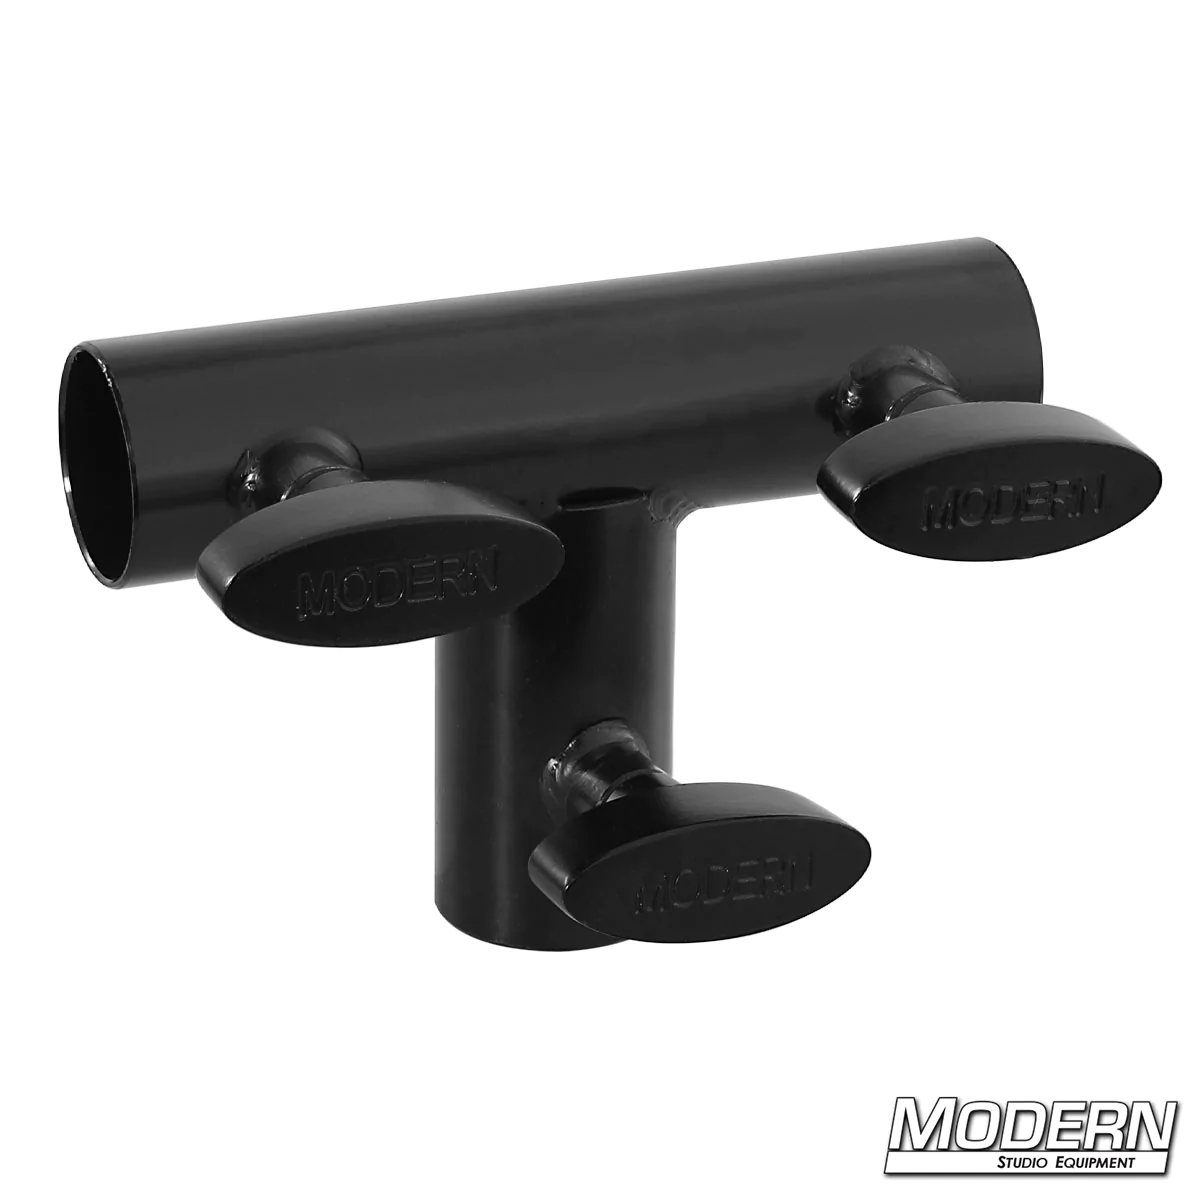 Tee for 1" Round Pipe - Black Zinc with T-Handles